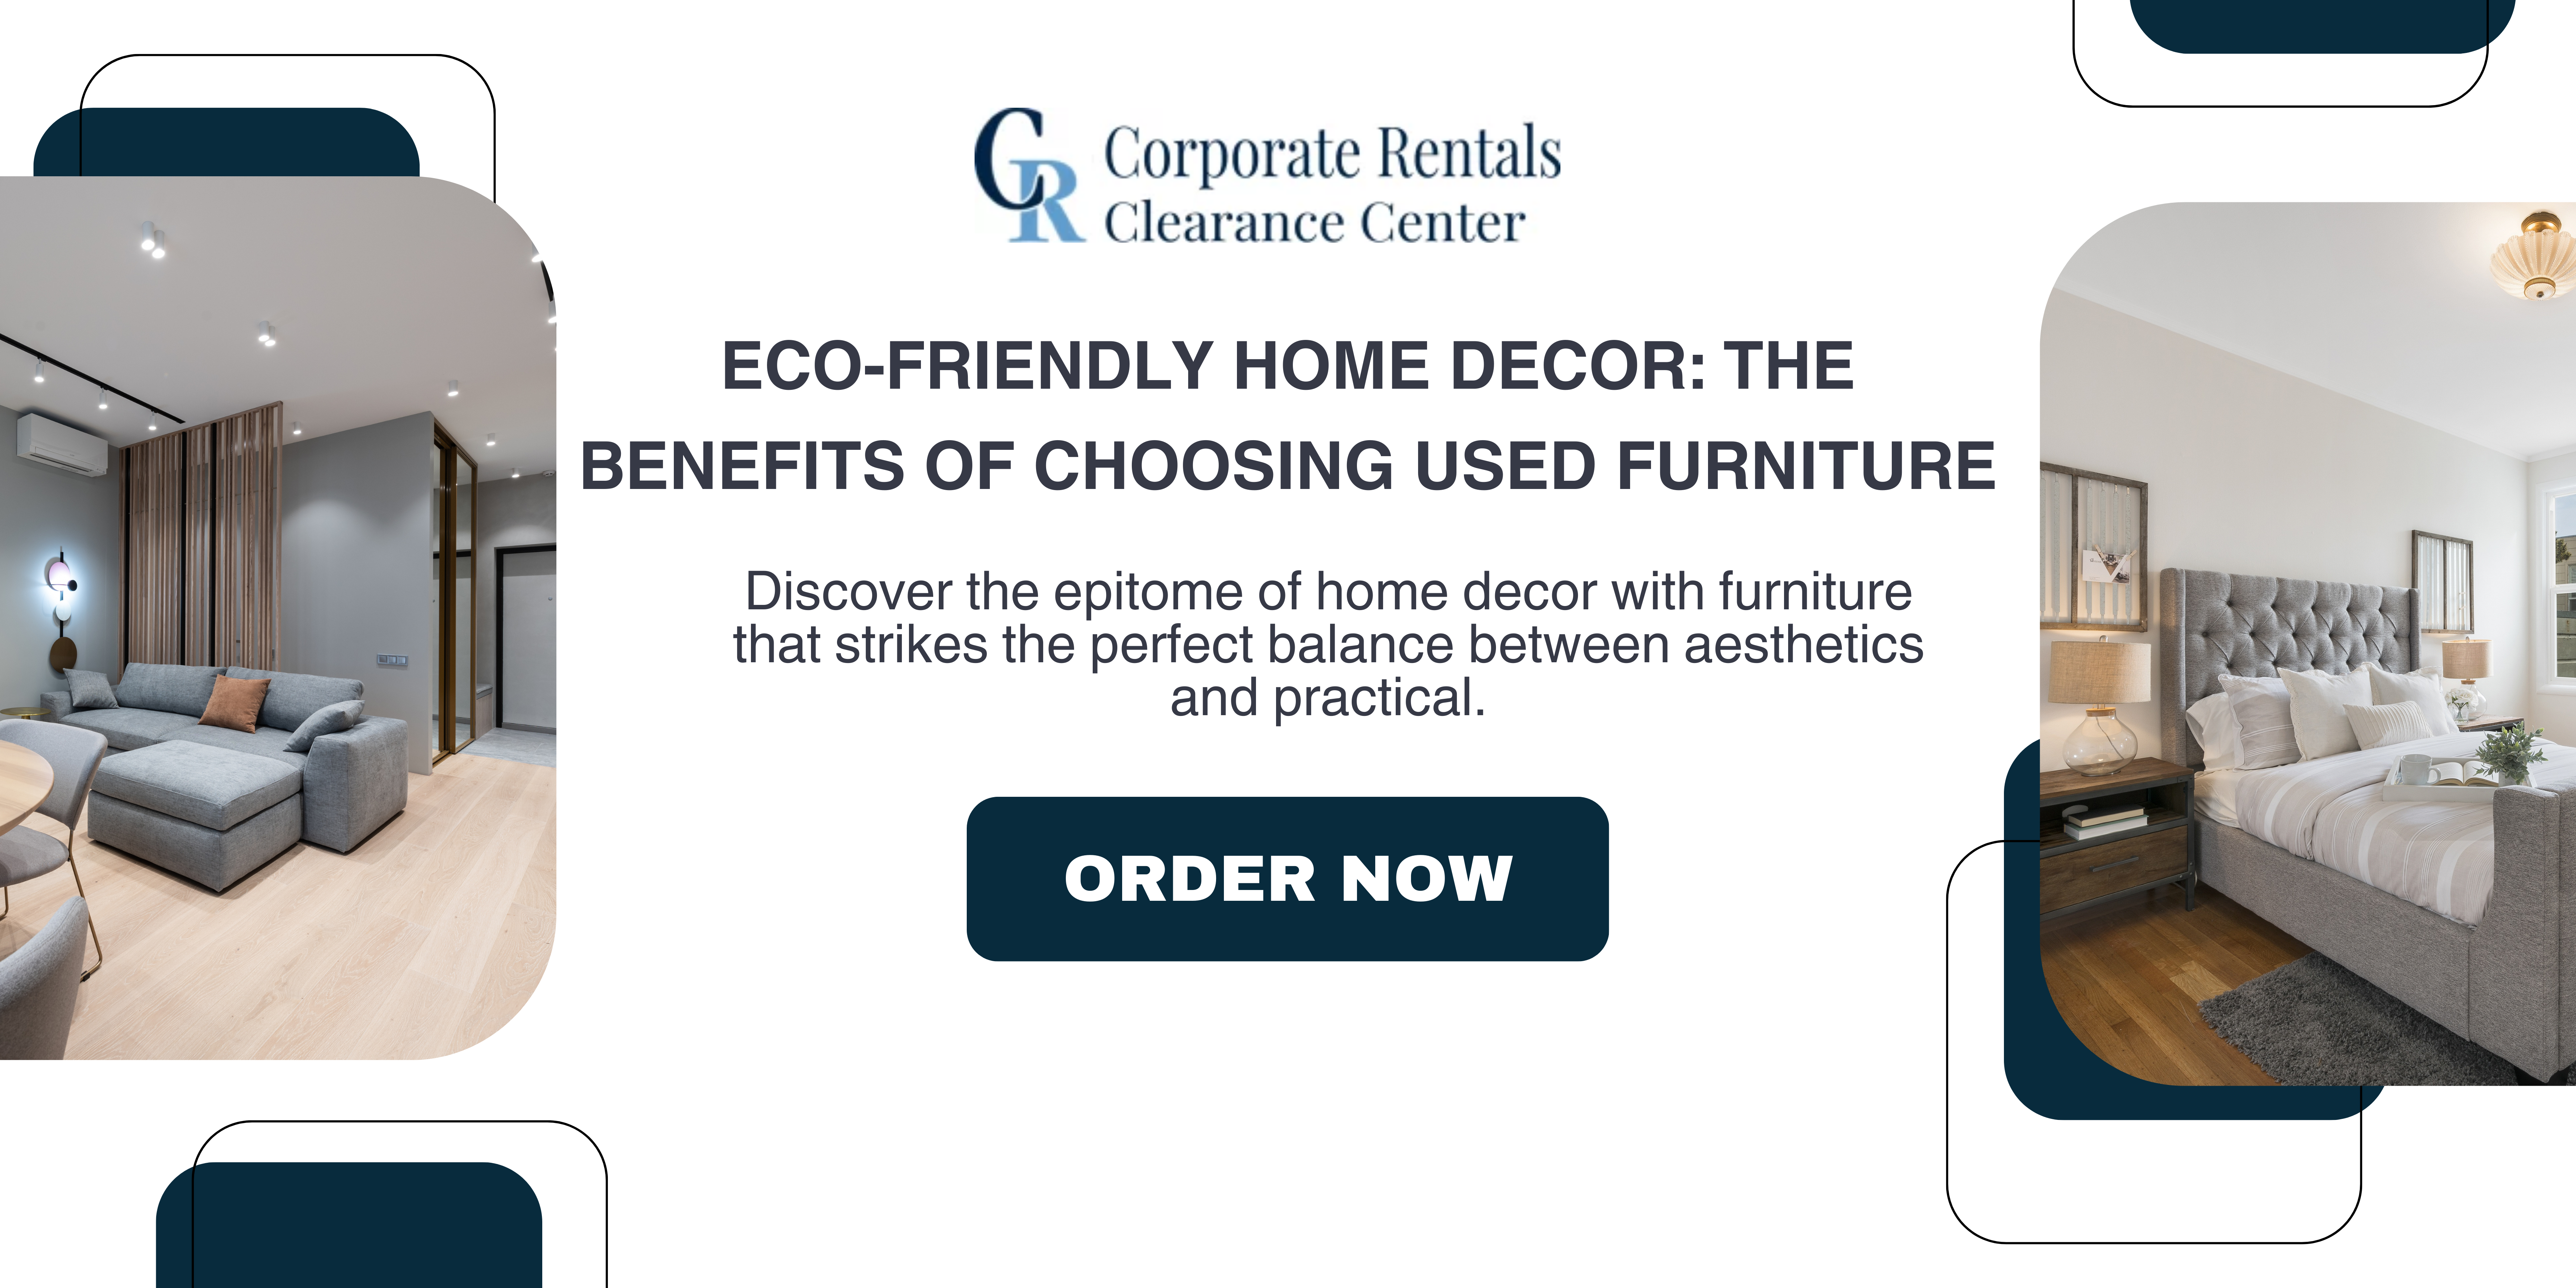 Eco-Friendly Home Decor: The Benefits of Choosing Used Furniture